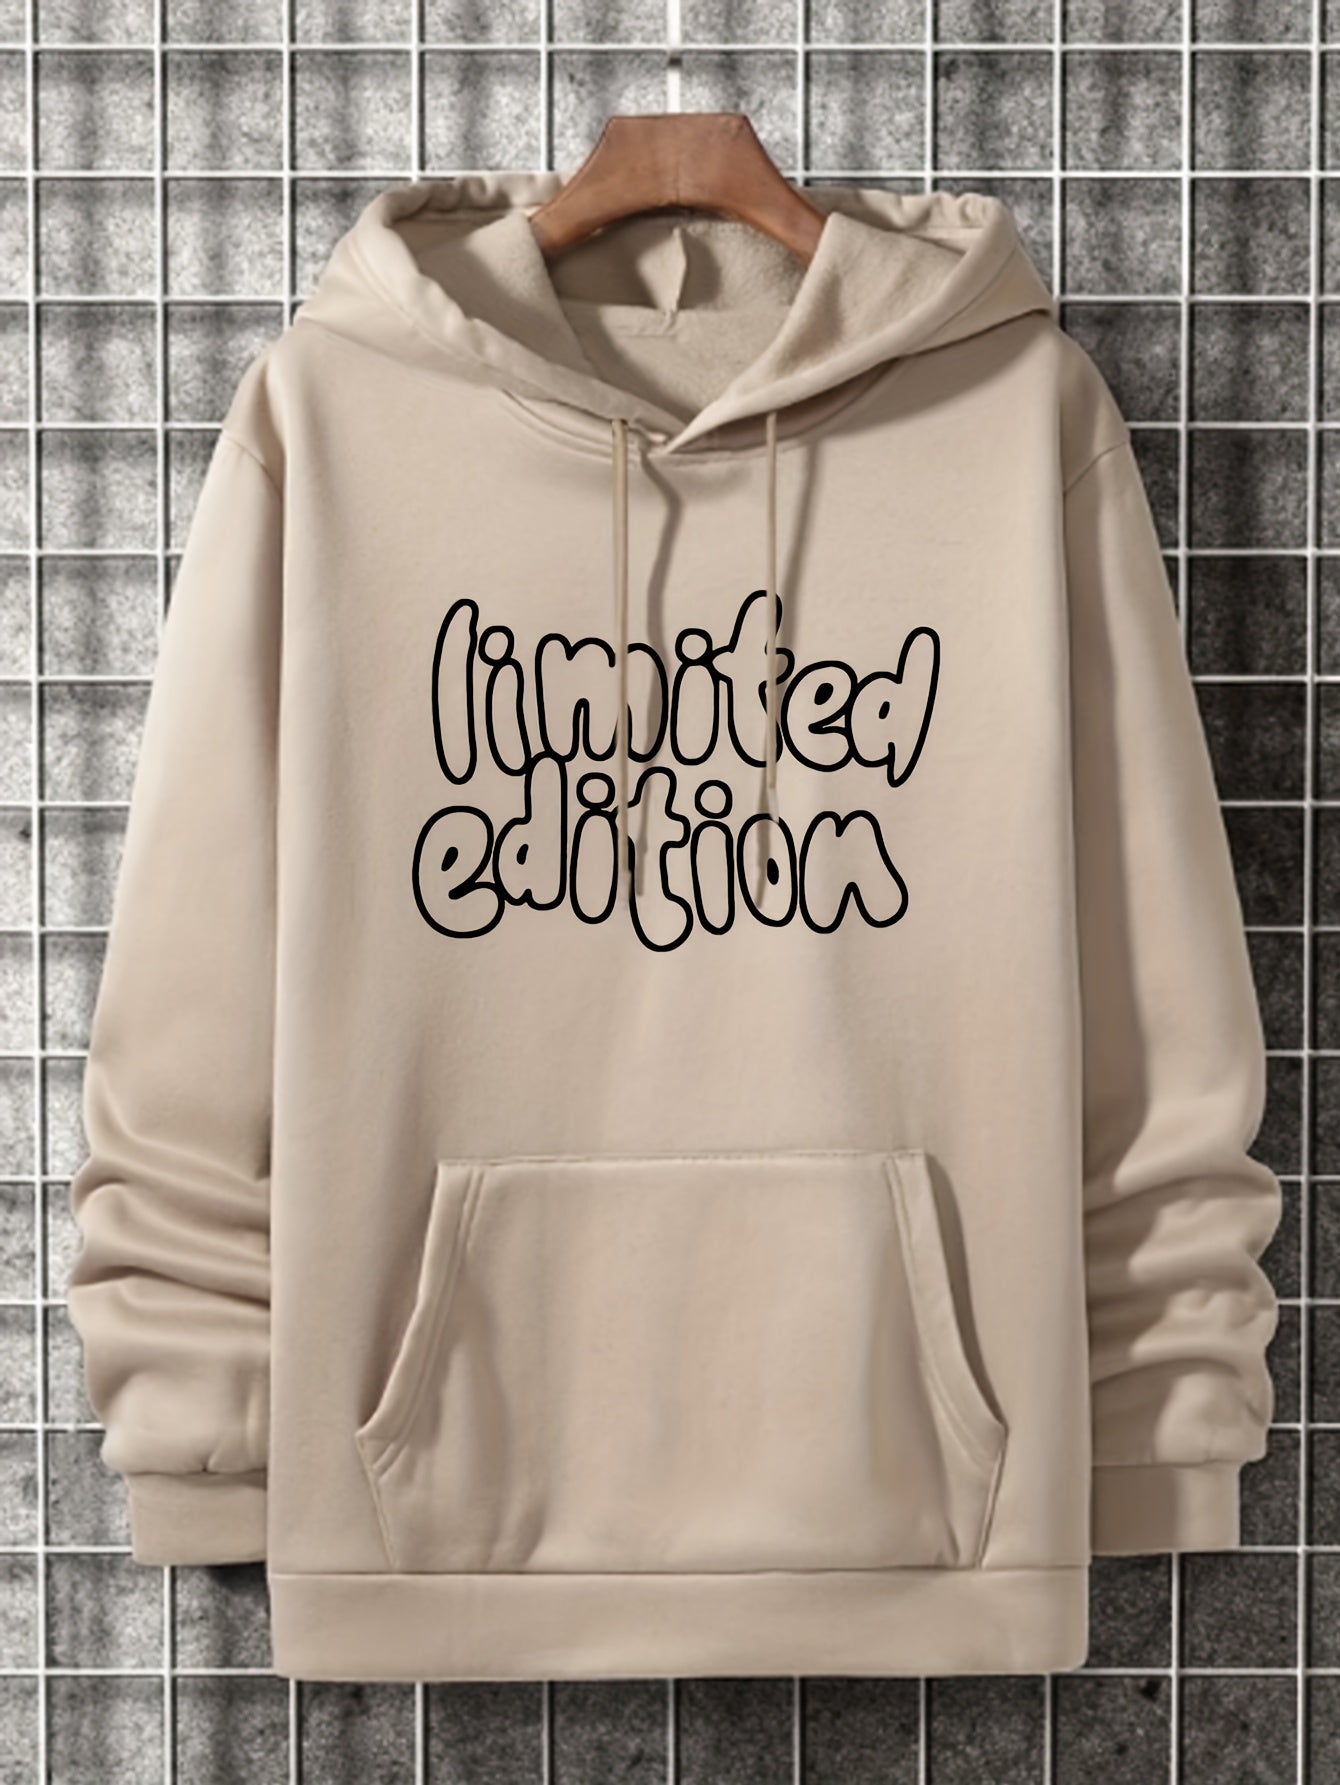 ''Limited Edition'' Graphic Men's Fleece Casual Drawstring Hoodie Sweatshirt Long Sleeve Fashion Hooded Pullover Hoodies With Pocket